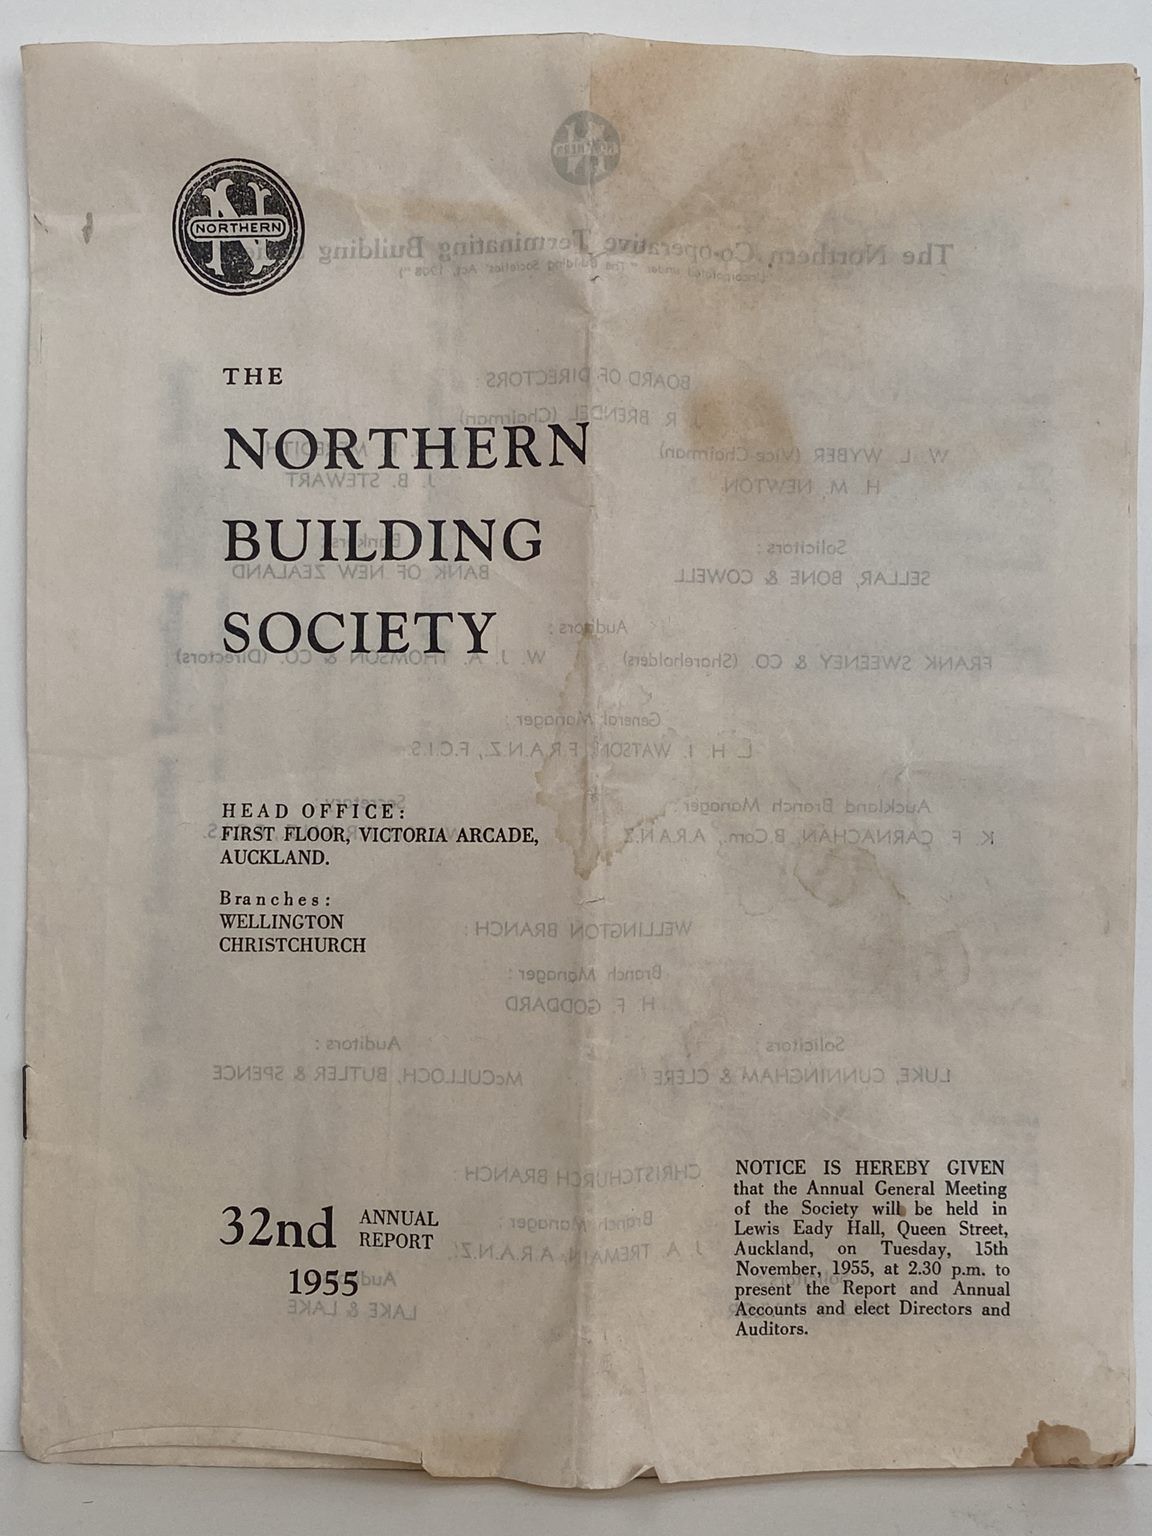 ANNUAL REPORT: The Northern Building Society 1955